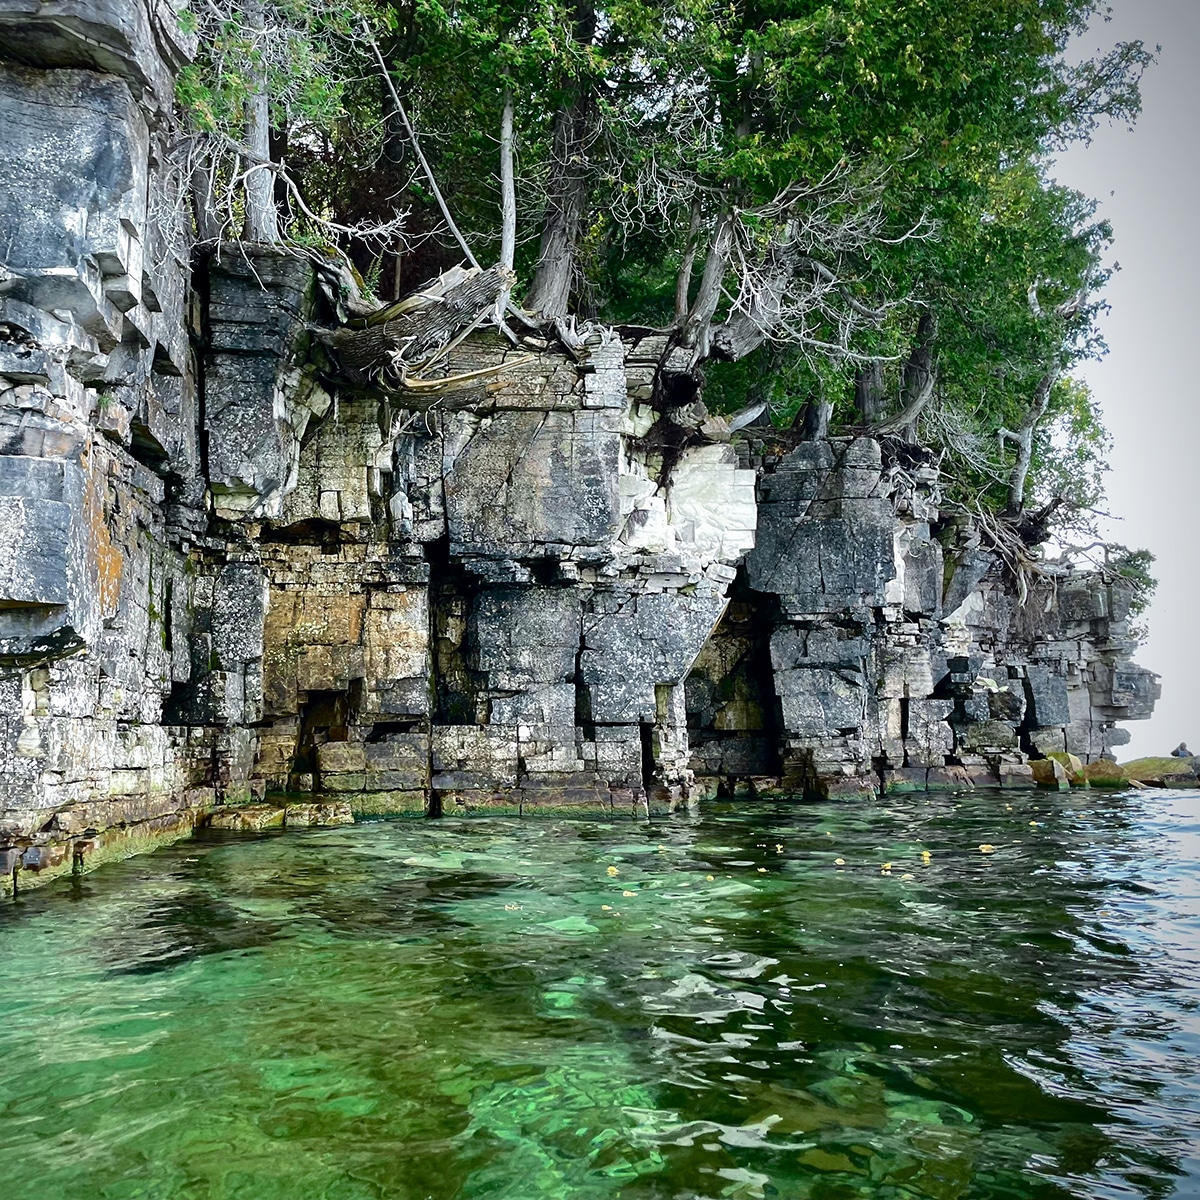 Kayaking past rocky cliffs along the Green Bay shore of Door County.